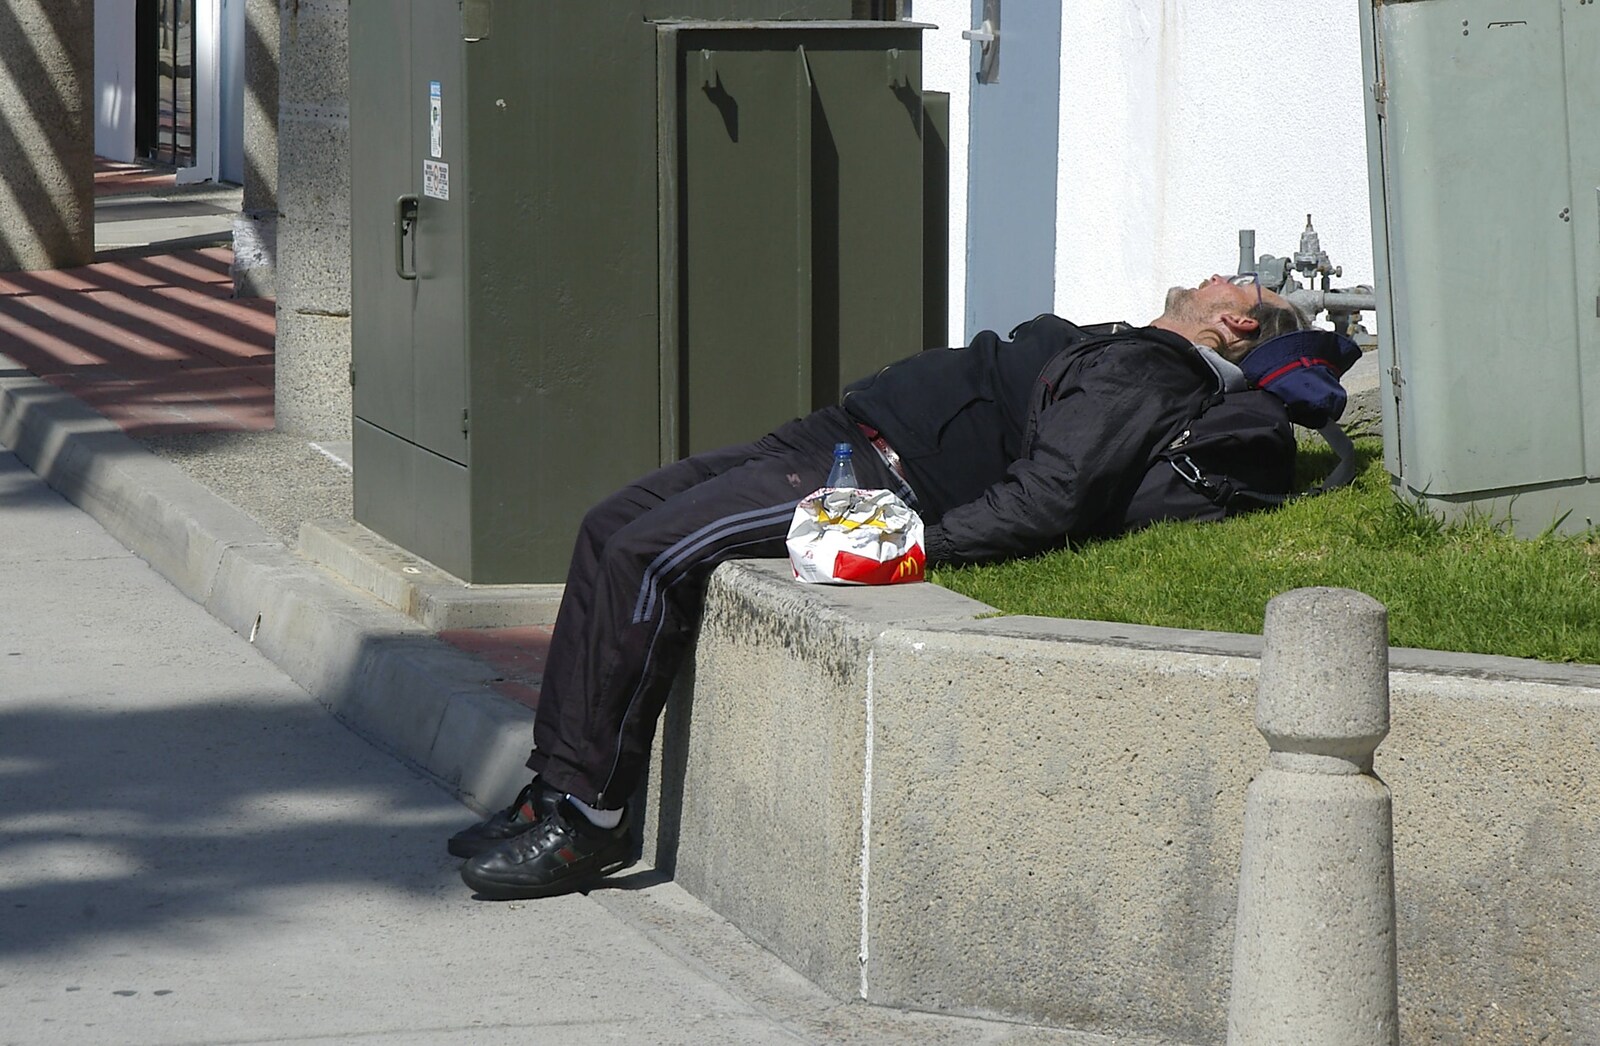 Some bloke takes a nap in the sun from Cruisin' Route 101, San Diego to Capistrano, California - 4th March 2006